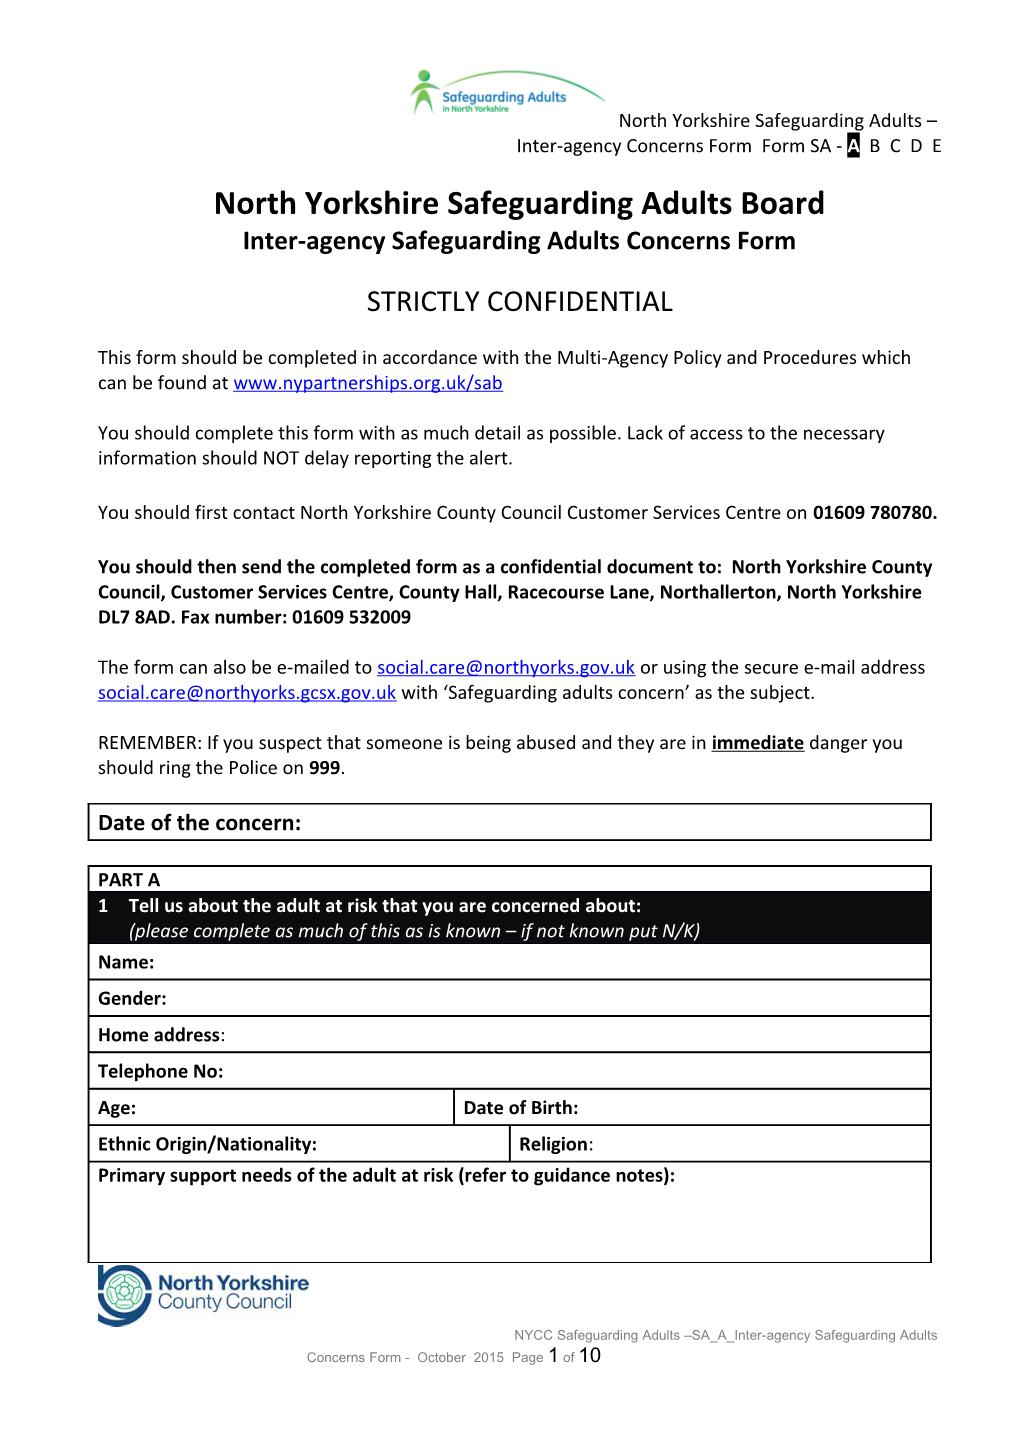 North Yorkshire County Council Safeguarding Adults